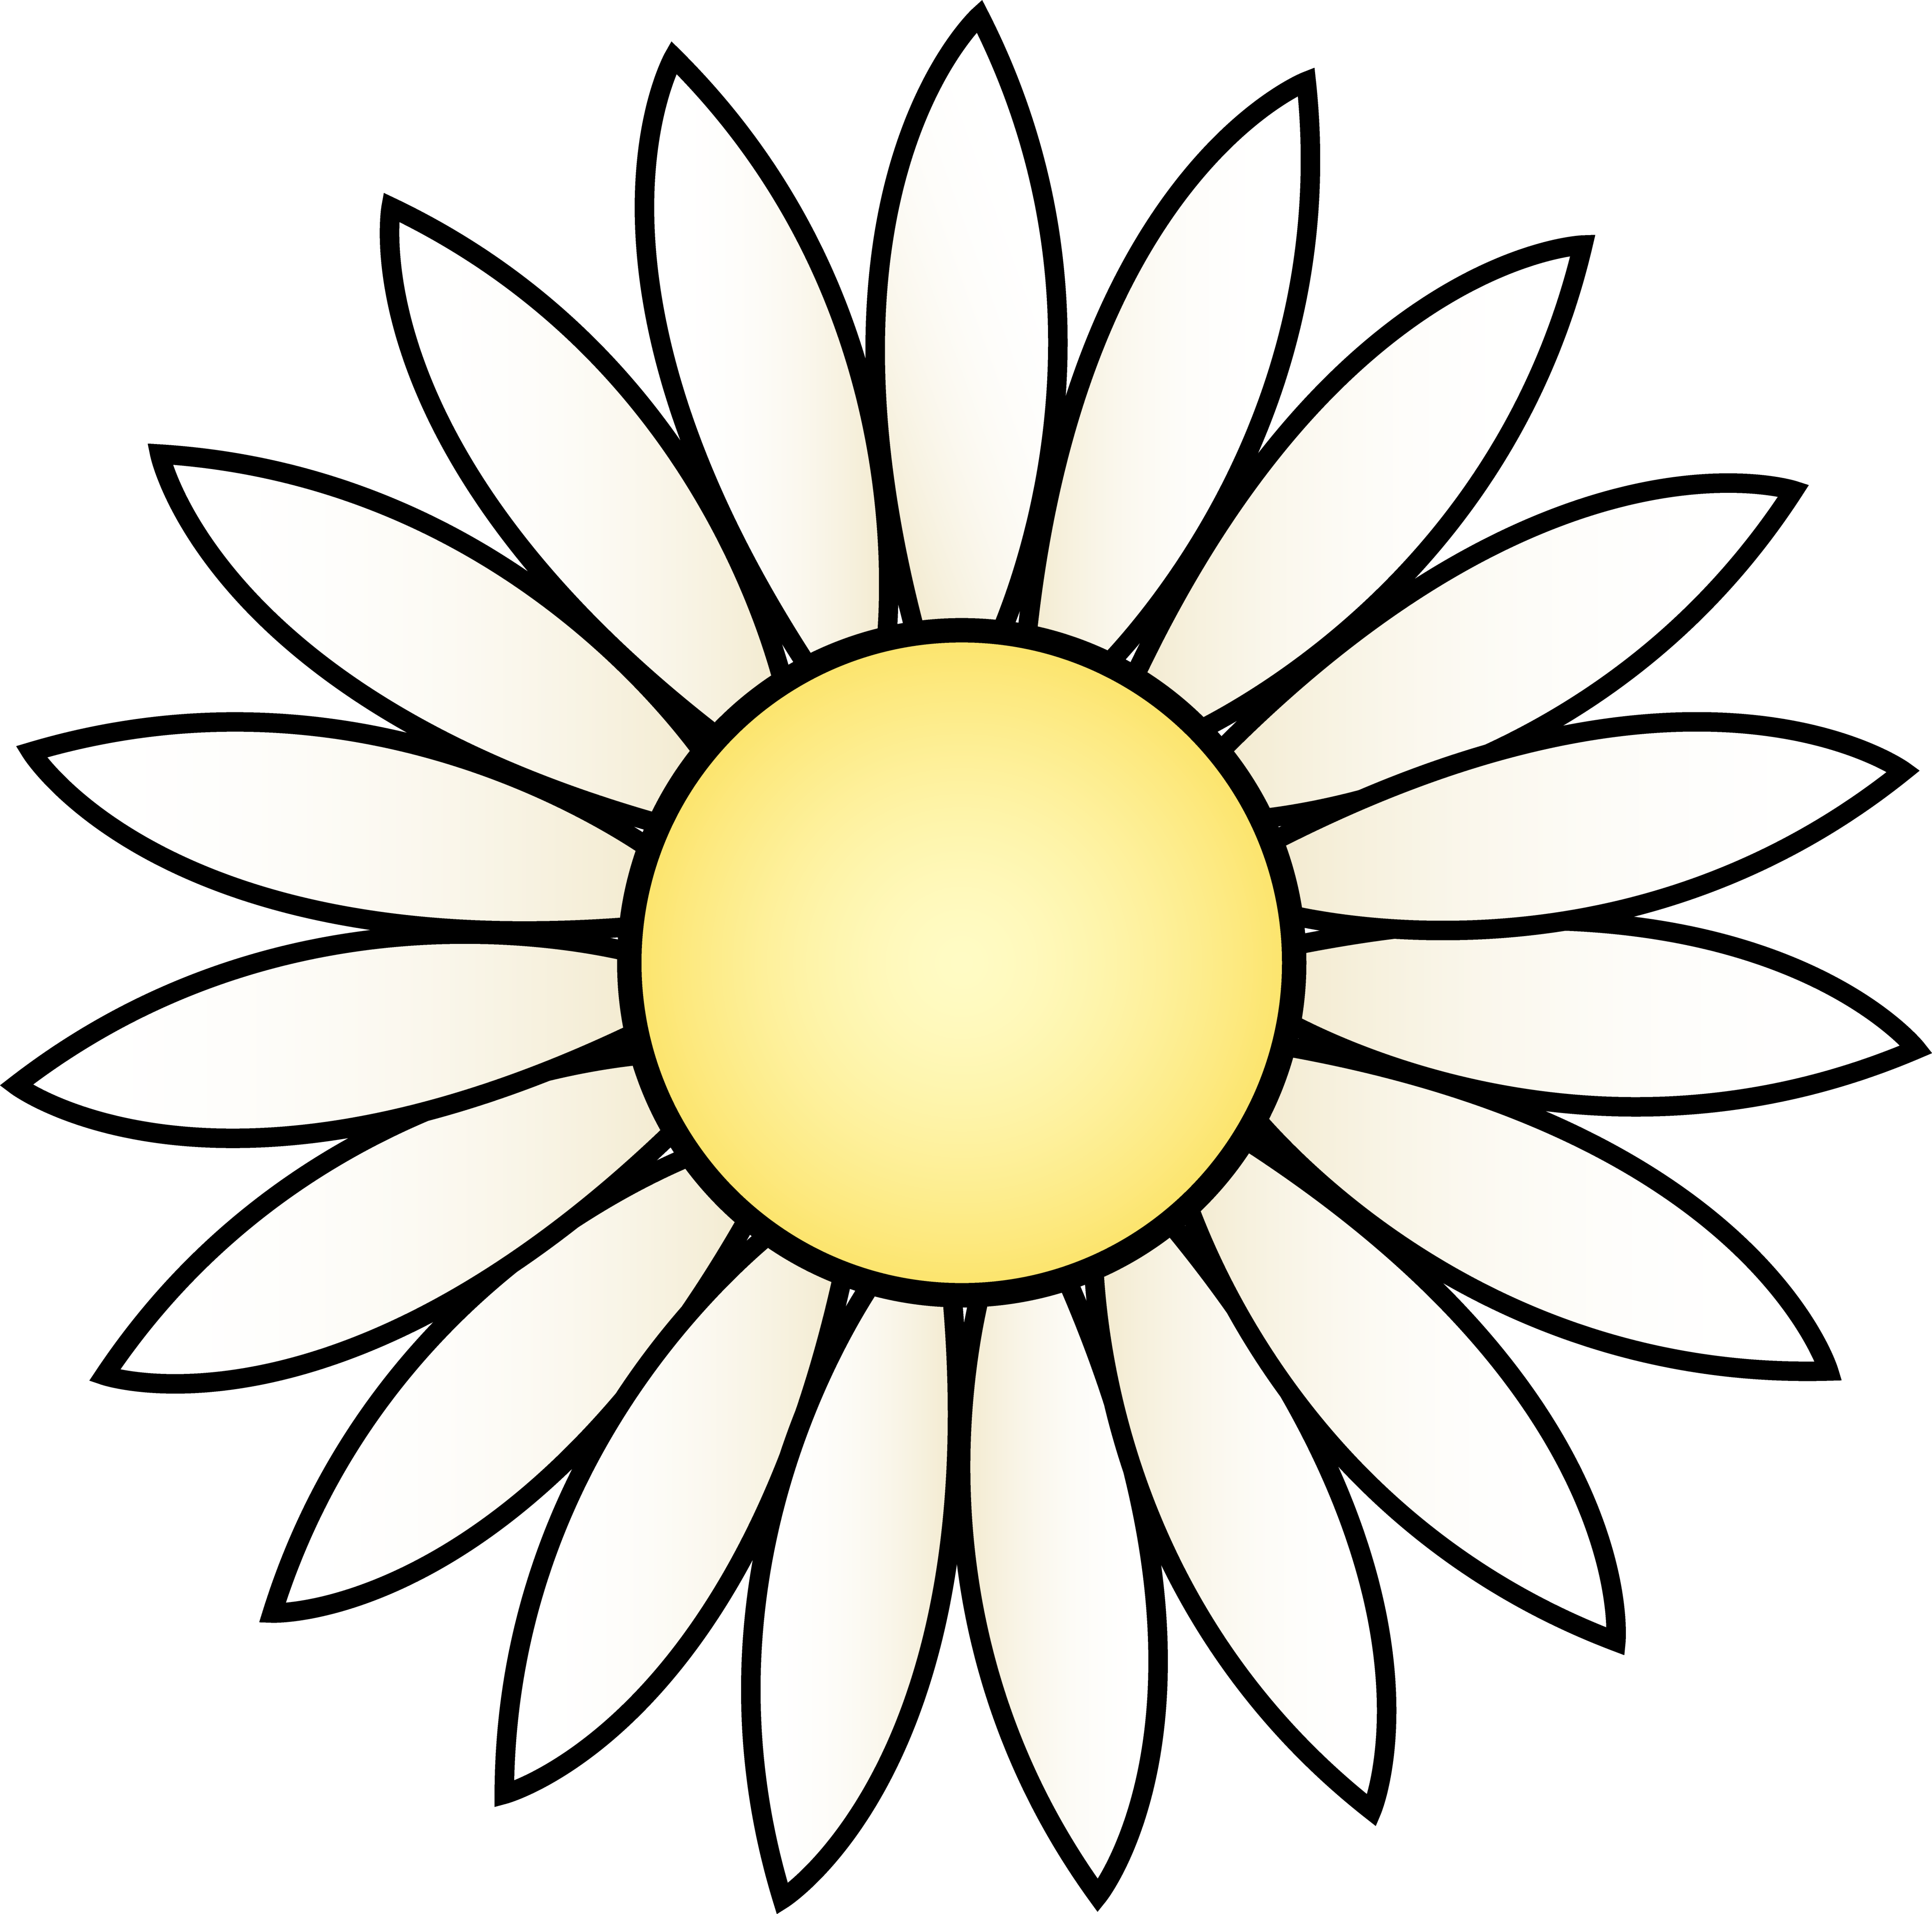 Free Sunflower Template Cliparts, Download Free Sunflower Template